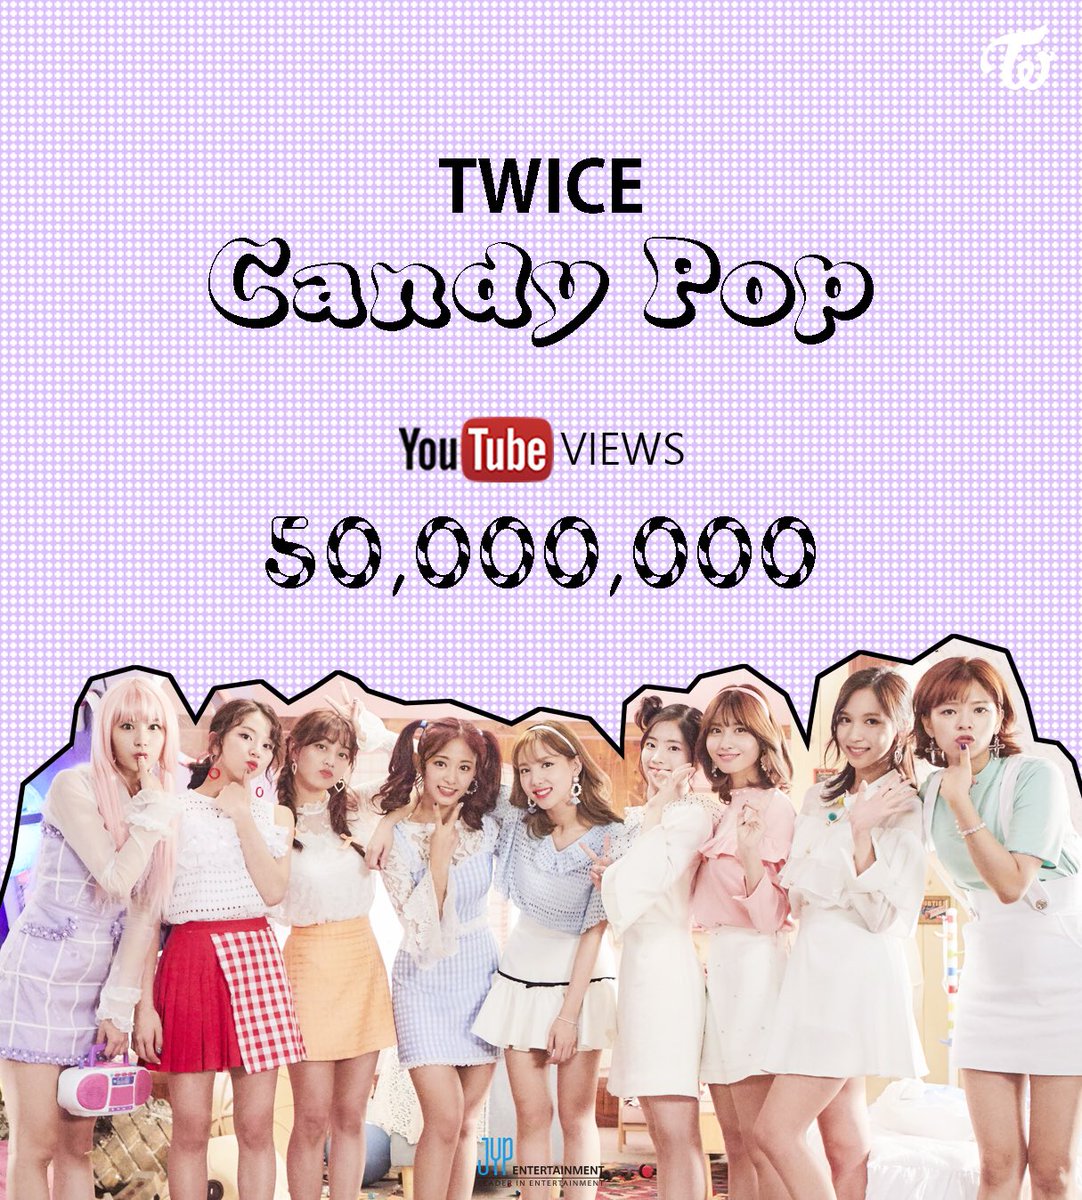 Twice Japan Official Twice Candy Pop Music Video 50 000 000 Views Candy Popなonceがくれるlucky Days いつもありがとう T Co 4pb2n5nmll Twice Candypop T Co Fdftf9qrlh